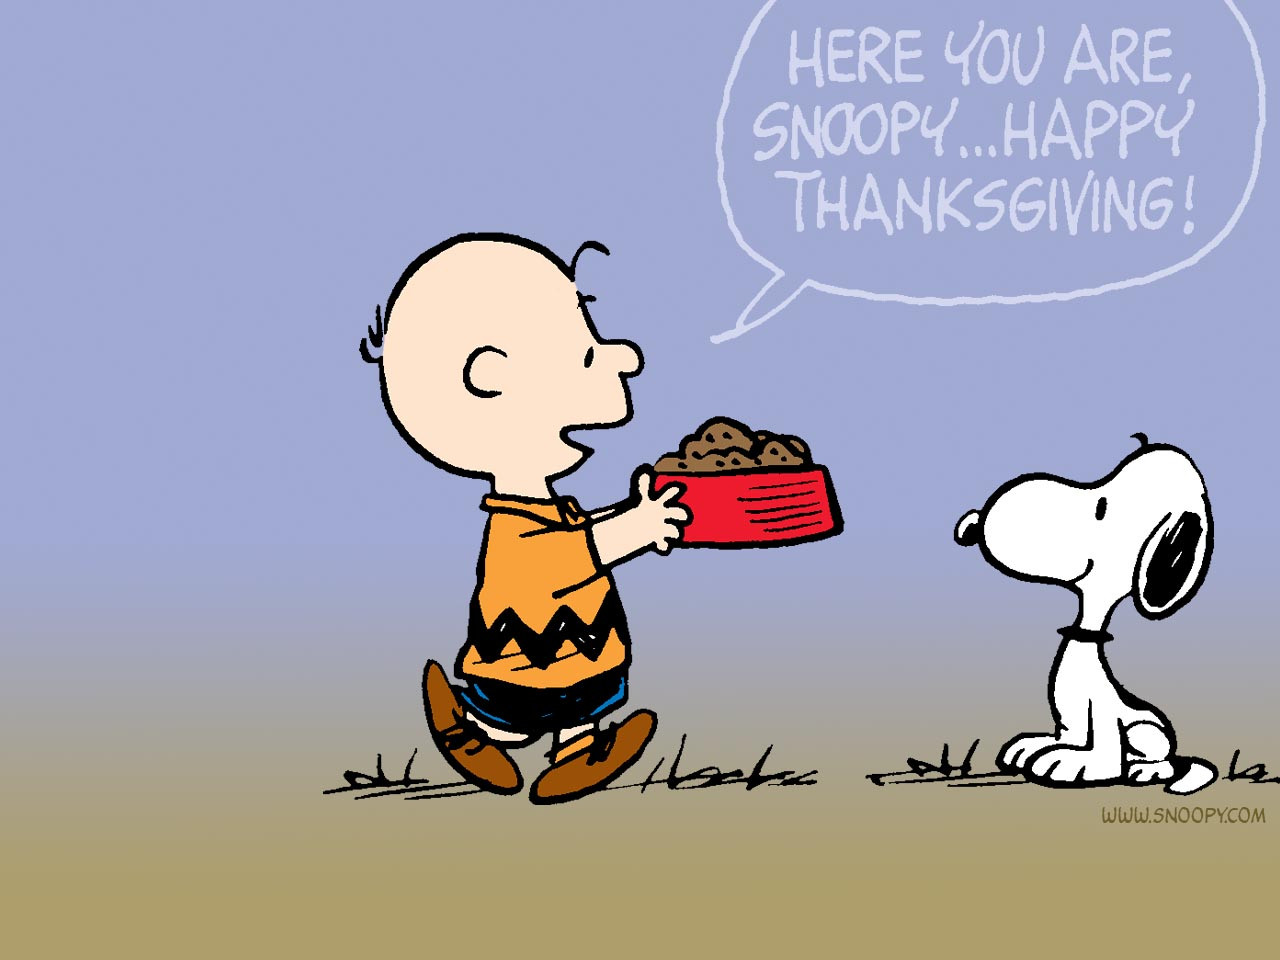 Charlie Brown Thanksgiving Quotes
 Thanksgiving Peanuts Wallpaper Fanpop